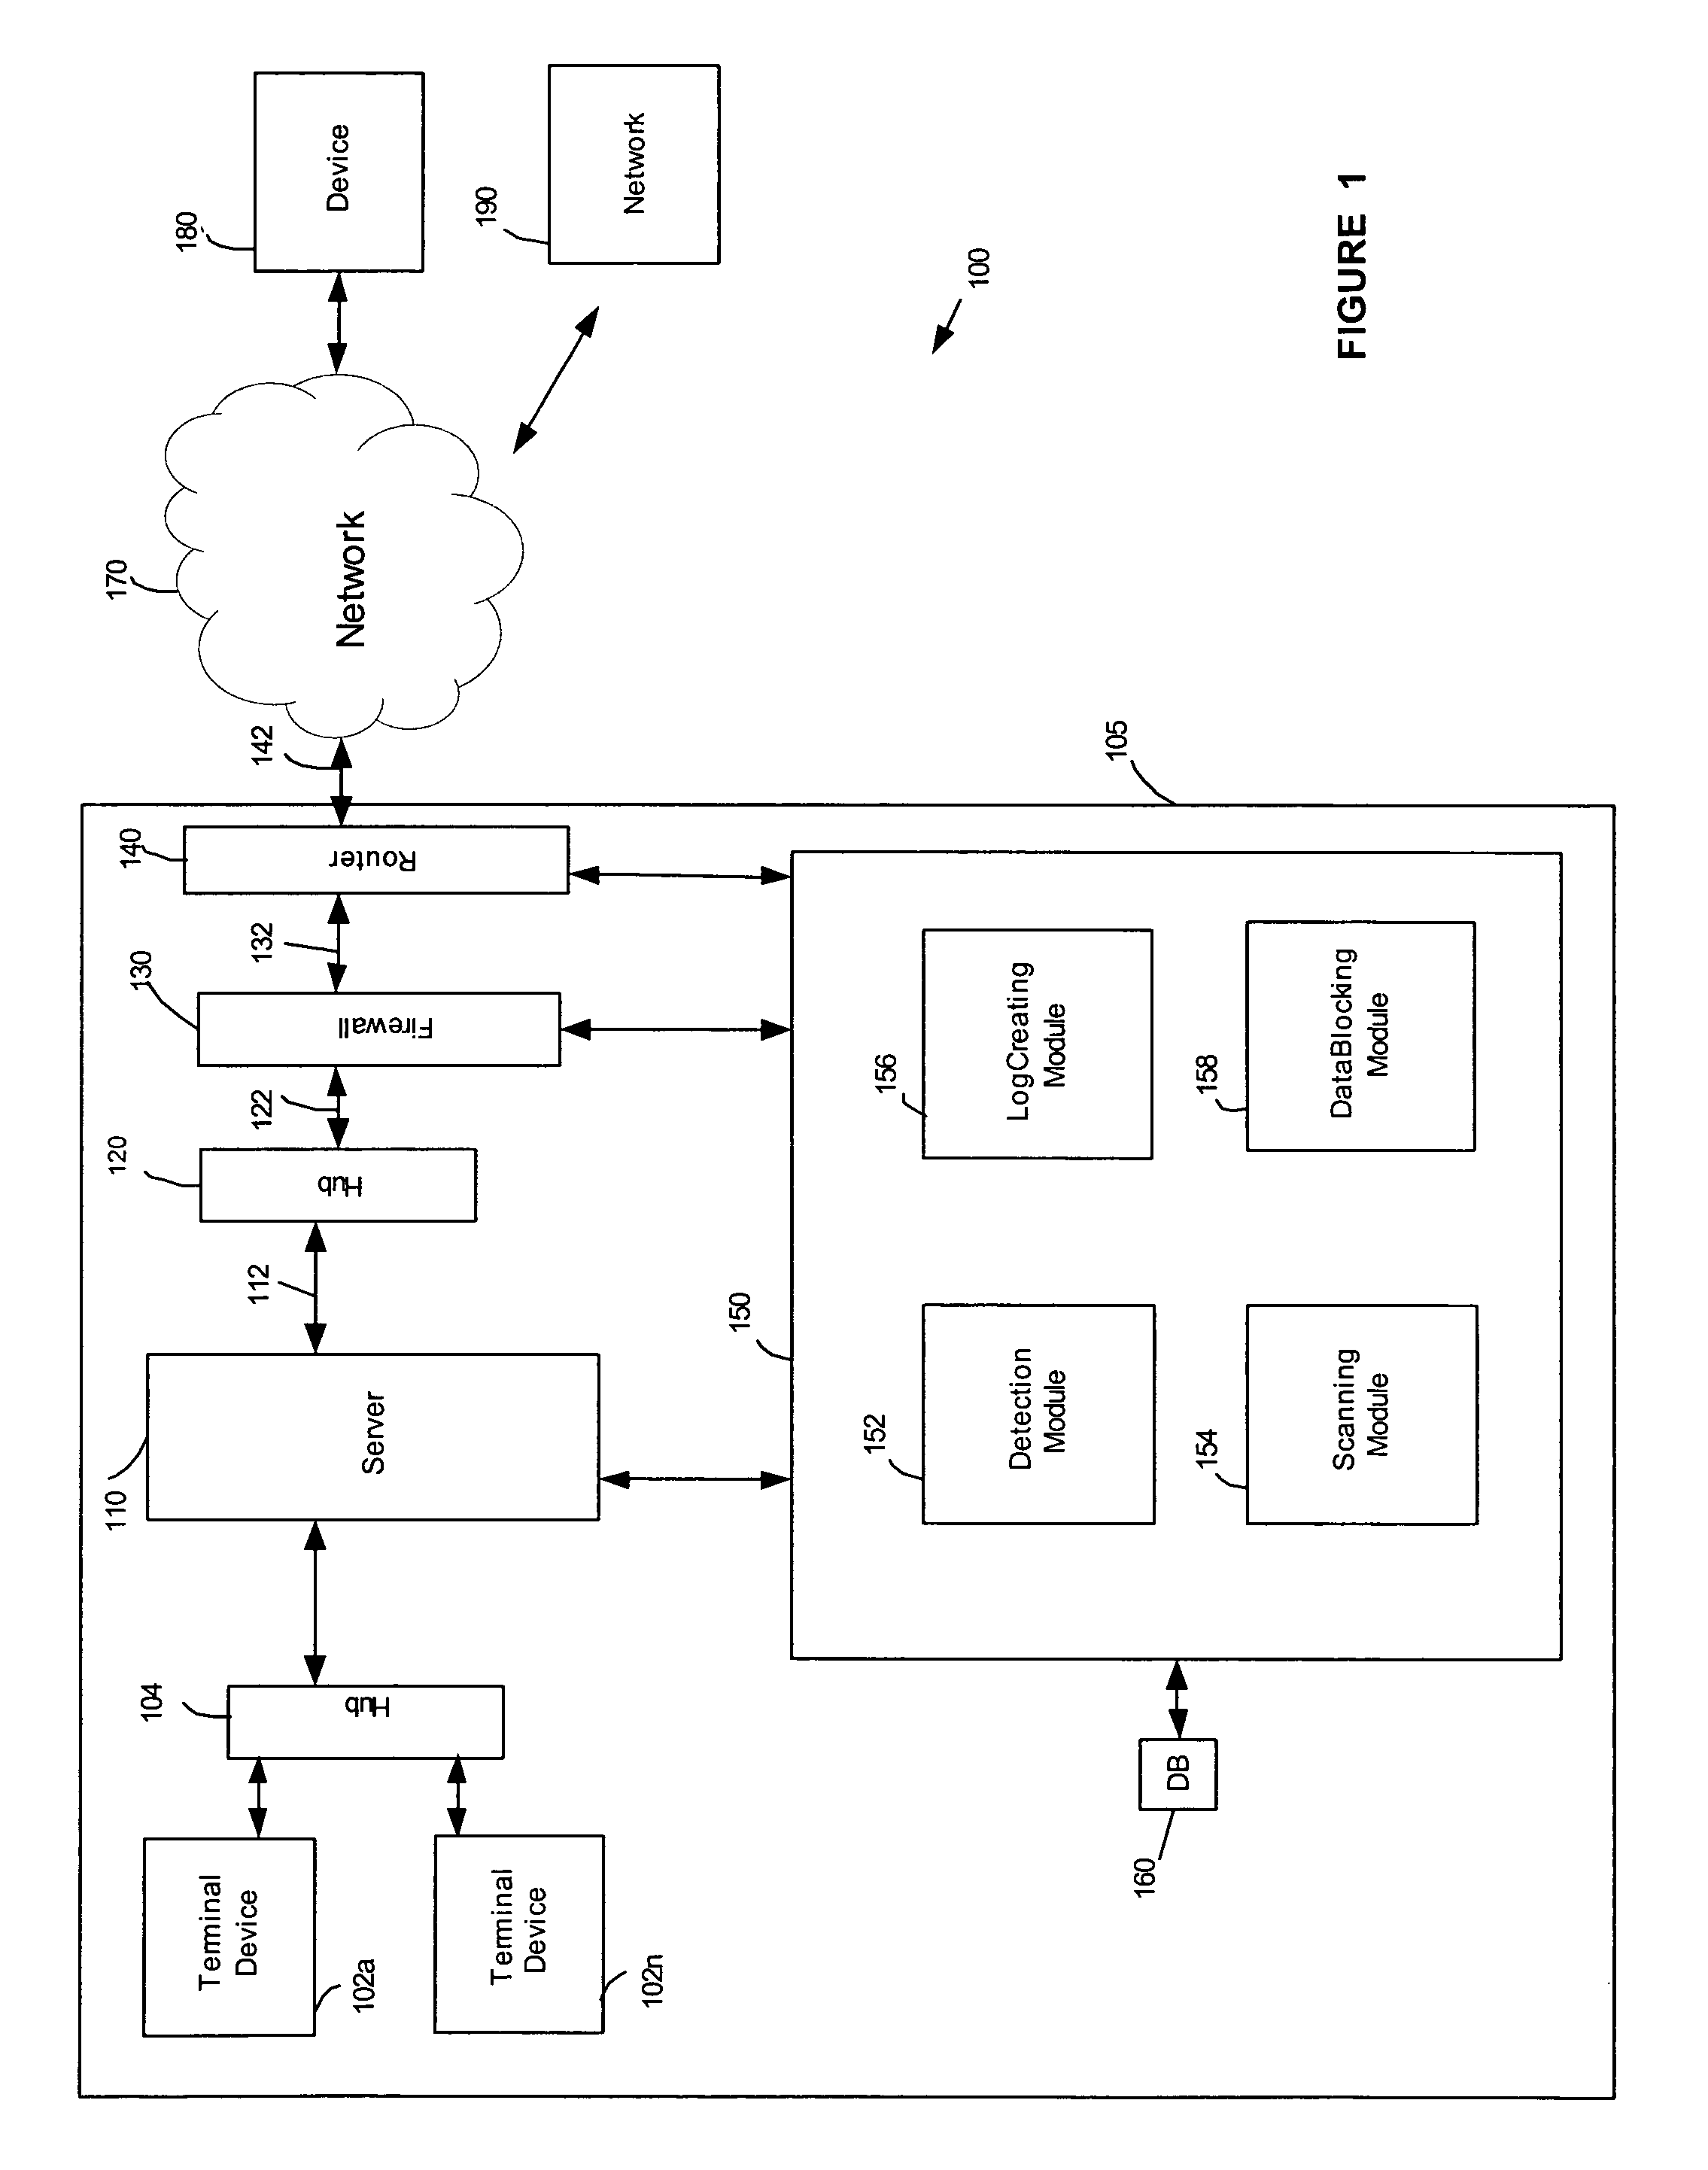 System and method for detecting and preventing attacks to a target computer system